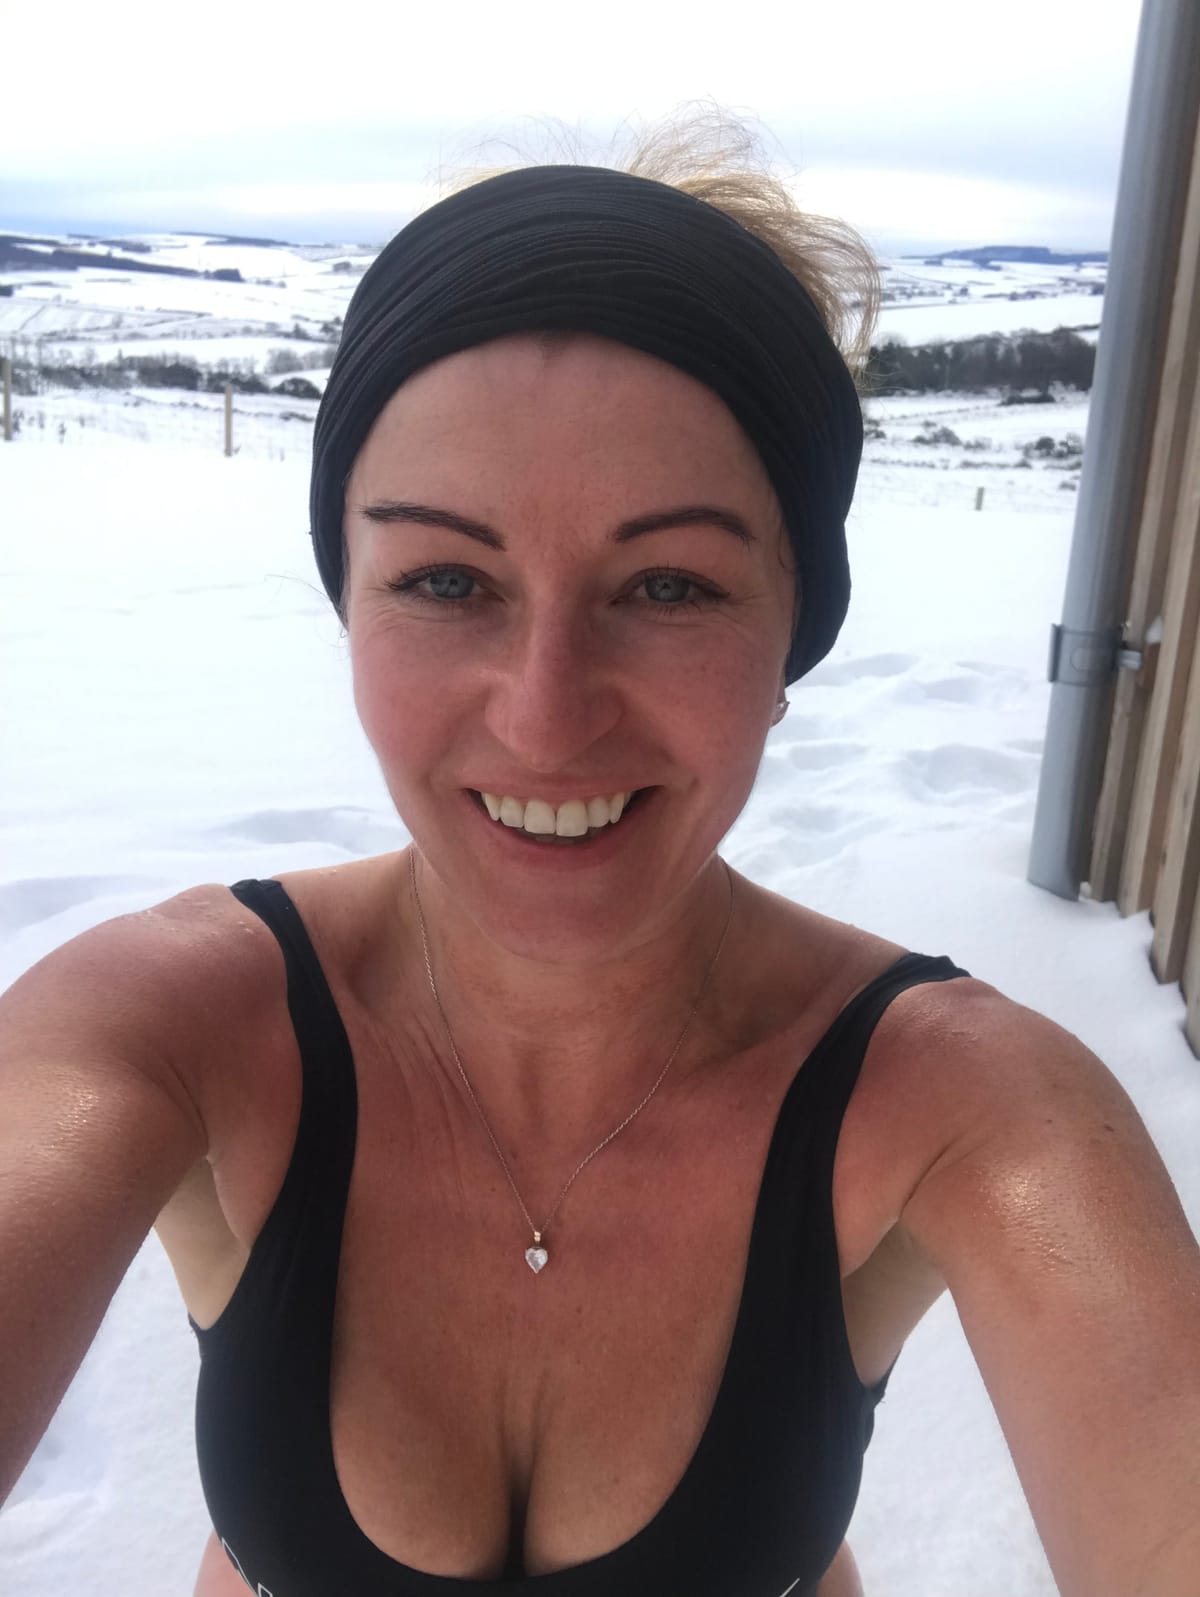 Blissfully Snowed In: My (Almost) Naked Shenanigans In The Snow.